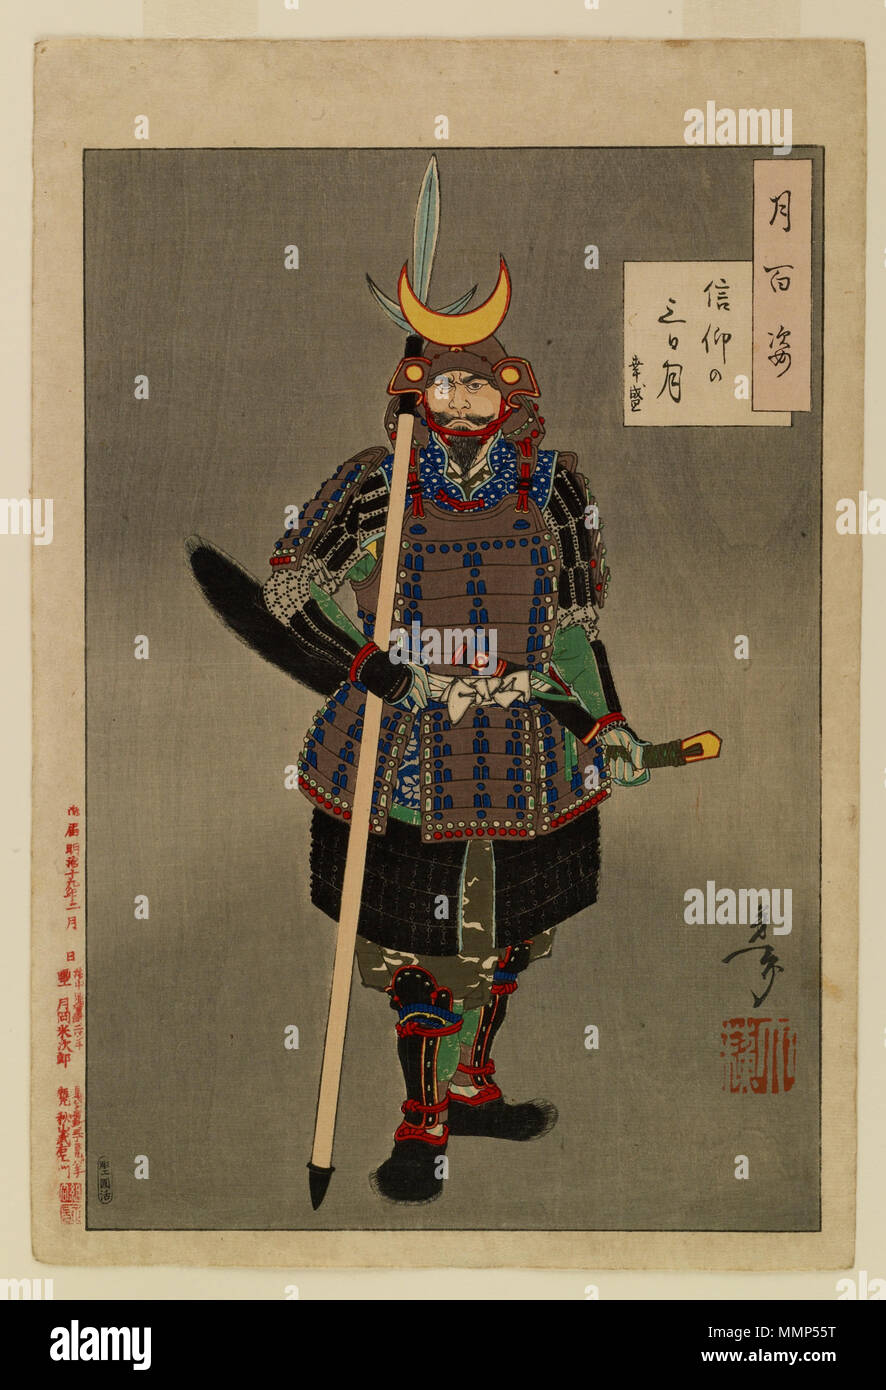 Samurai 16th century High Resolution Stock Photography and Images - Alamy